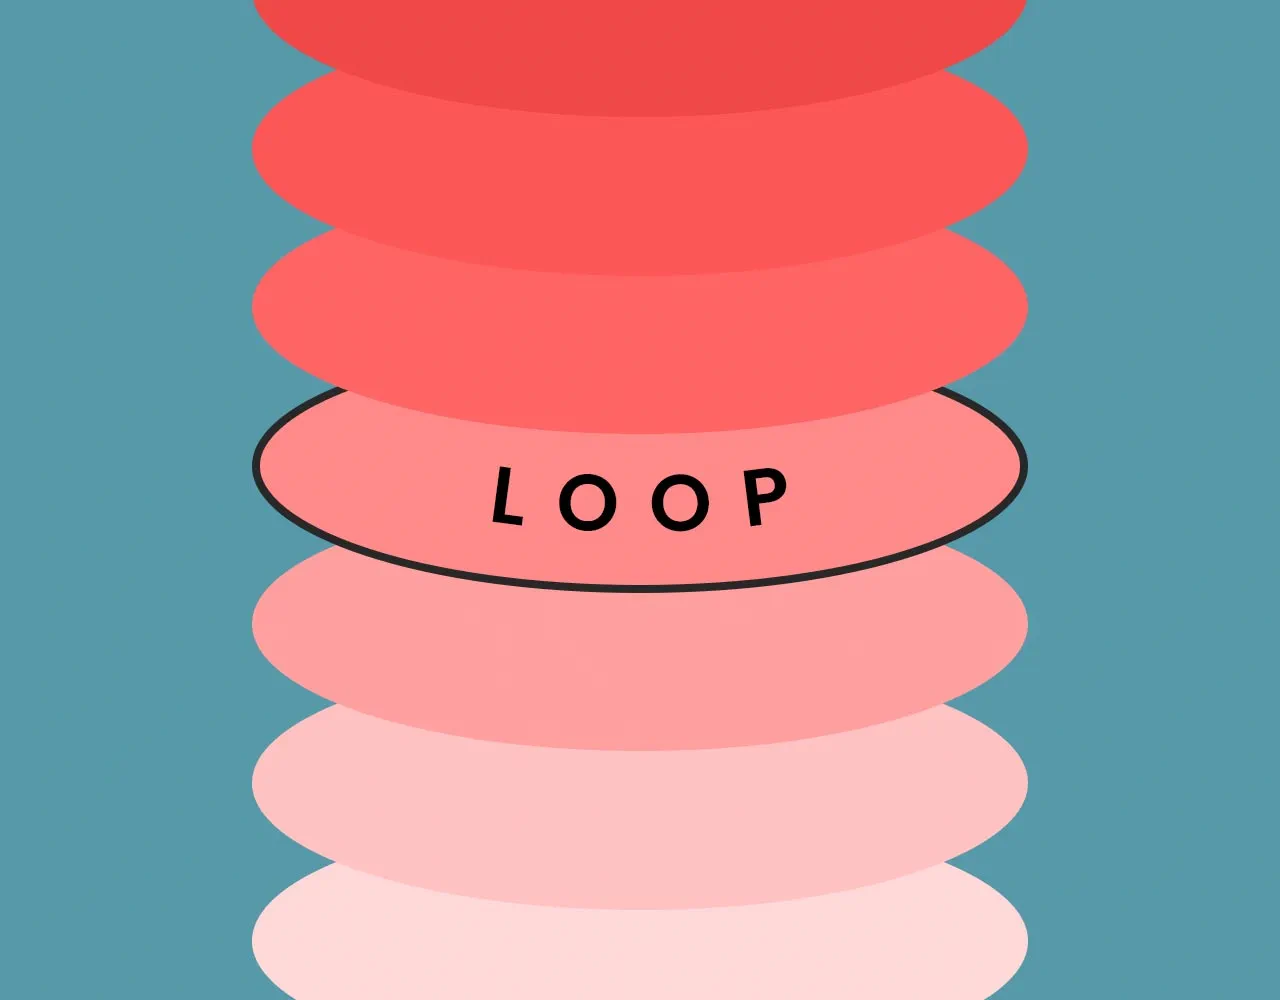 Learn how to use loops